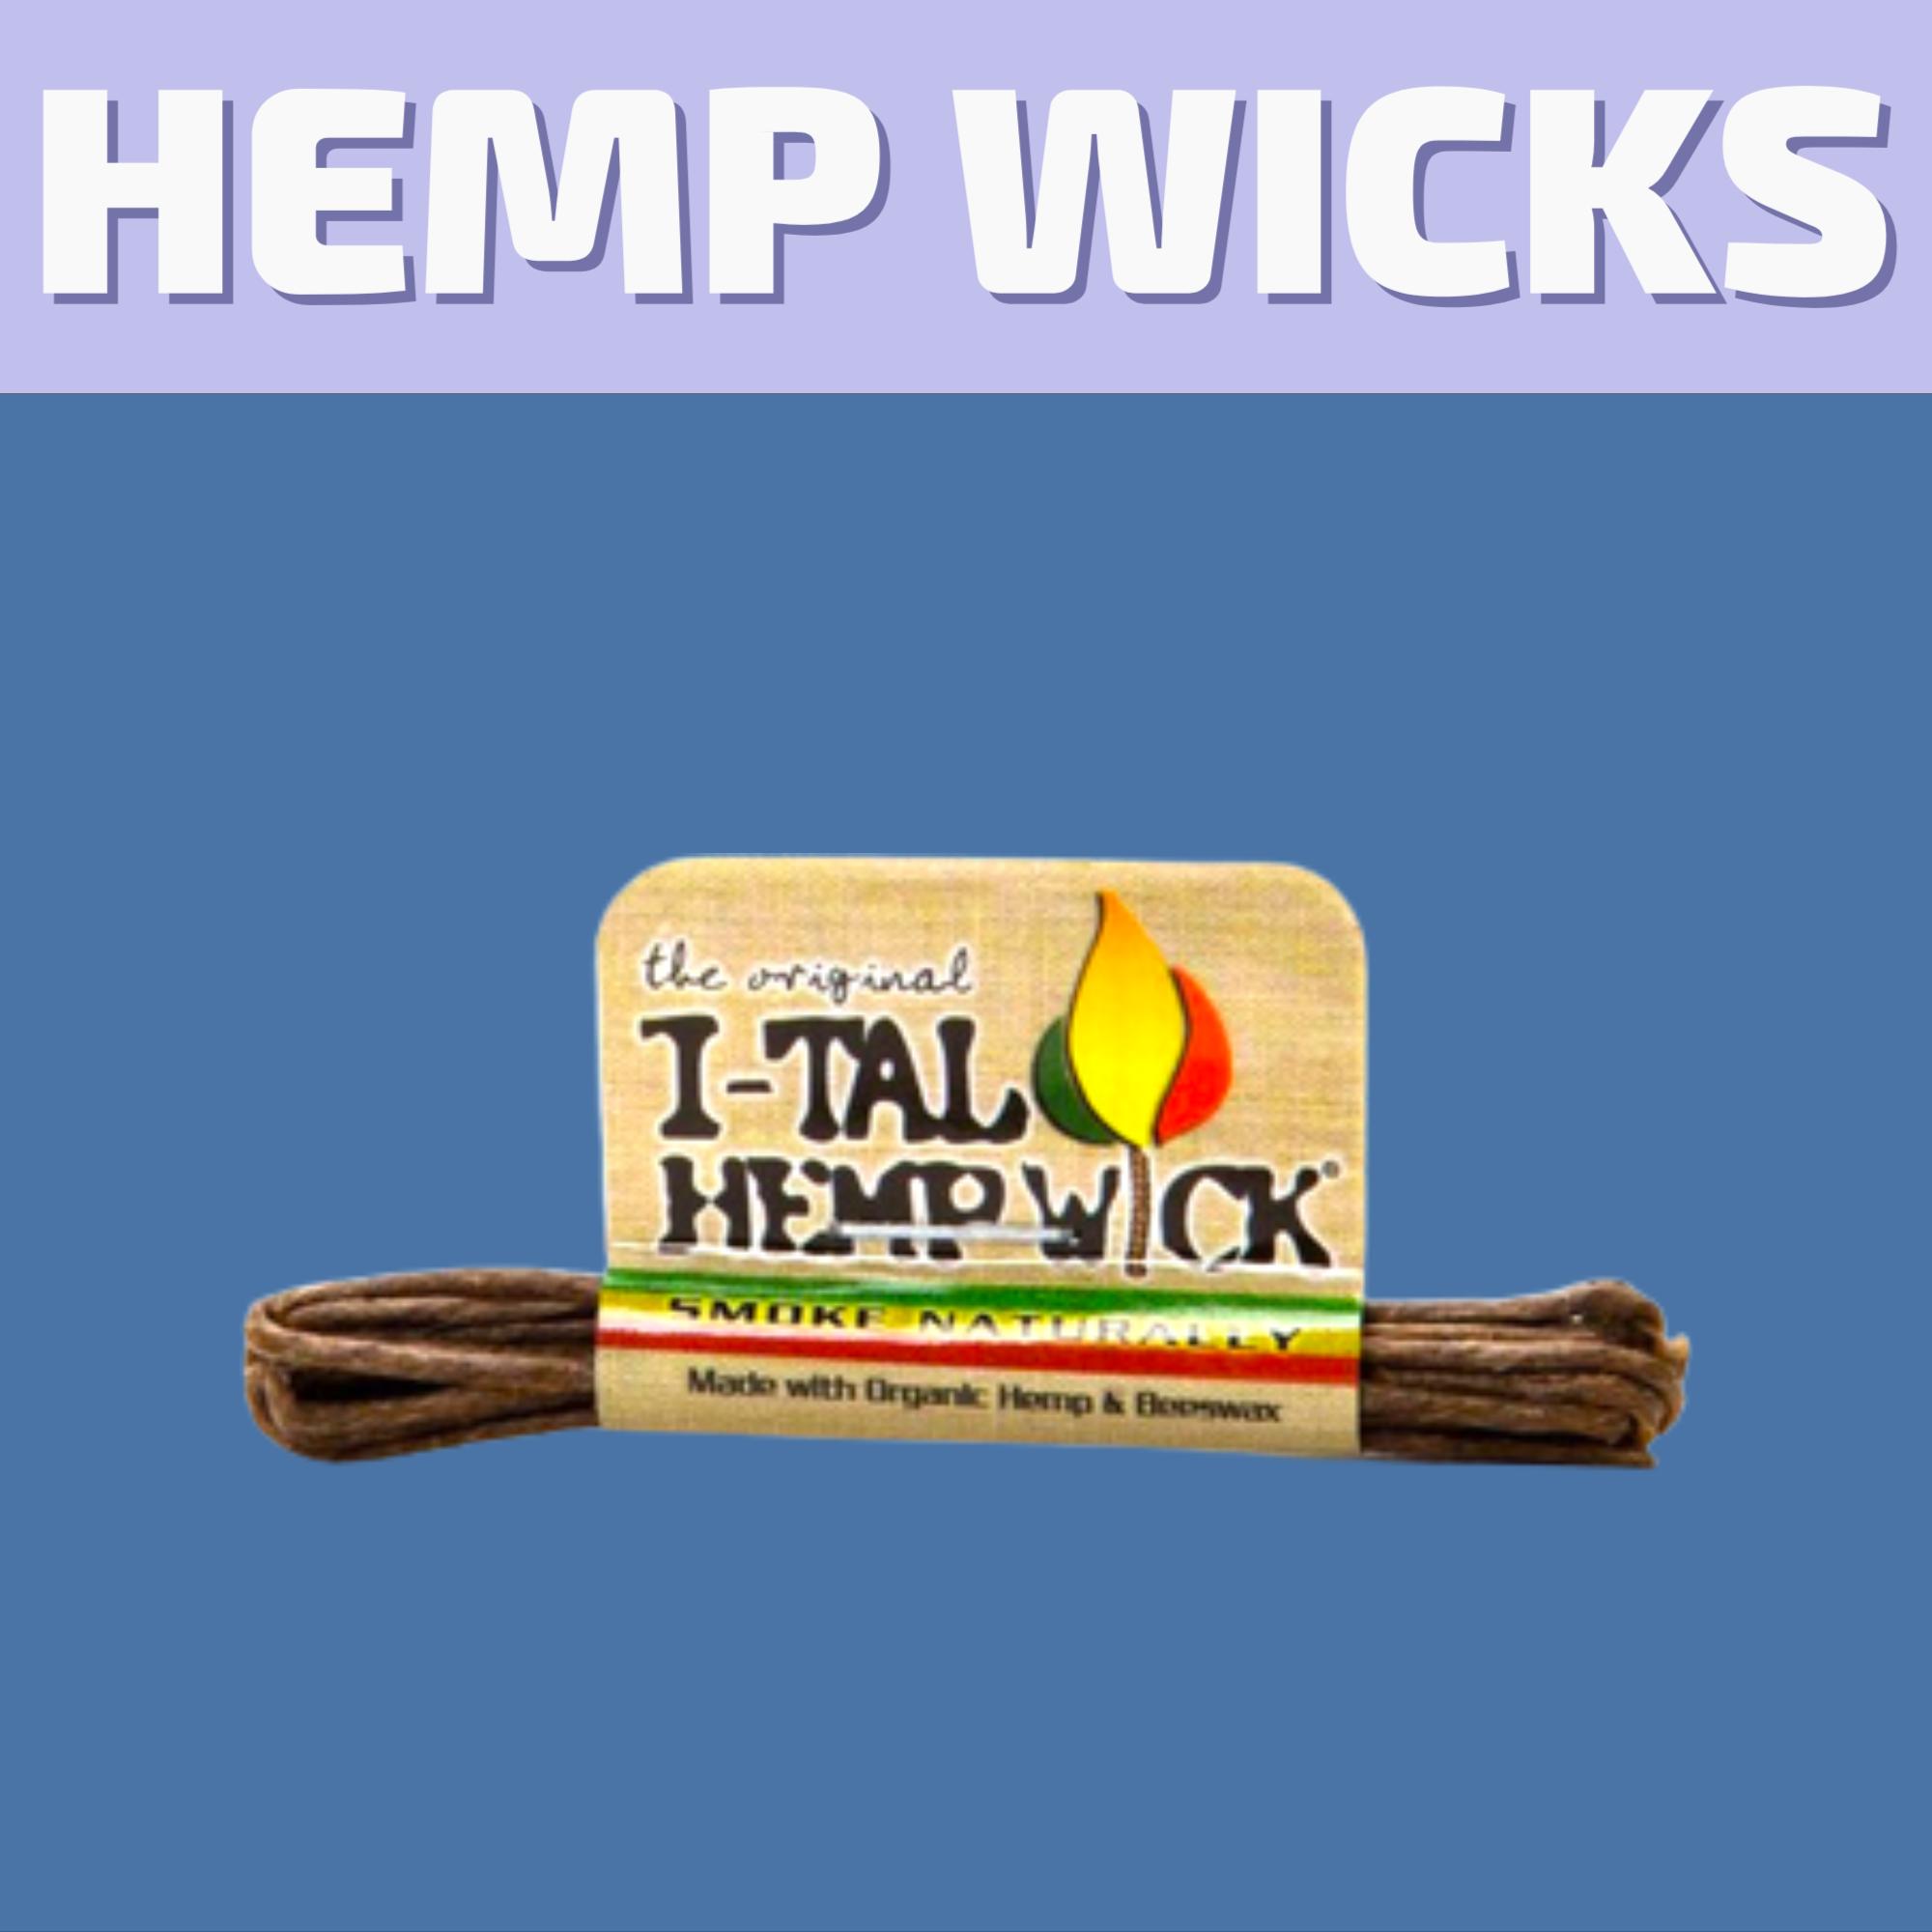 Shop our selection of Hemp Wicks for same day delivery in Winnipeg or visit our cannabis store on 580 Academy Road.   